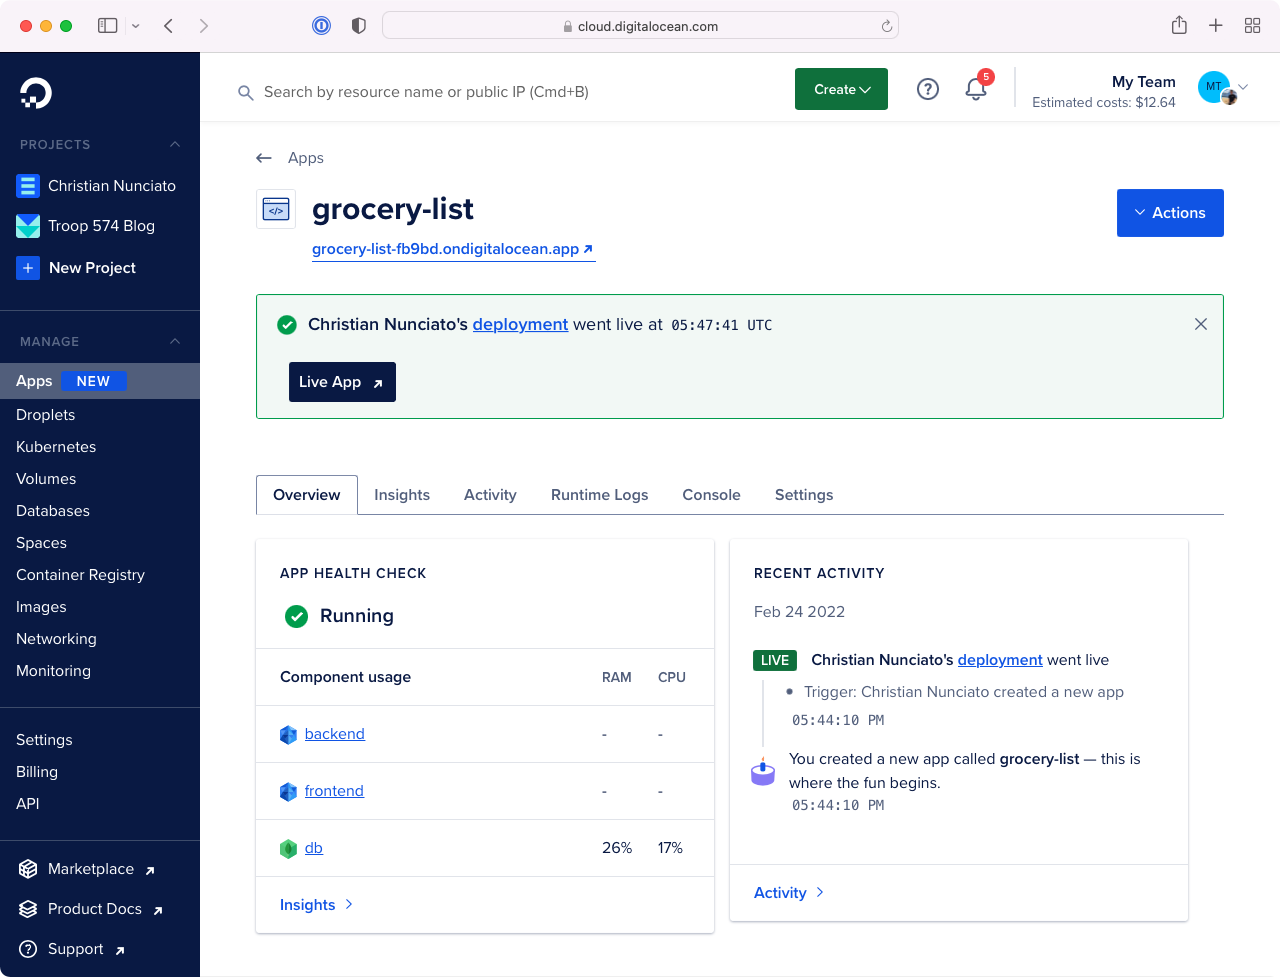 The grocery-list app and its components in the DigitalOcean console